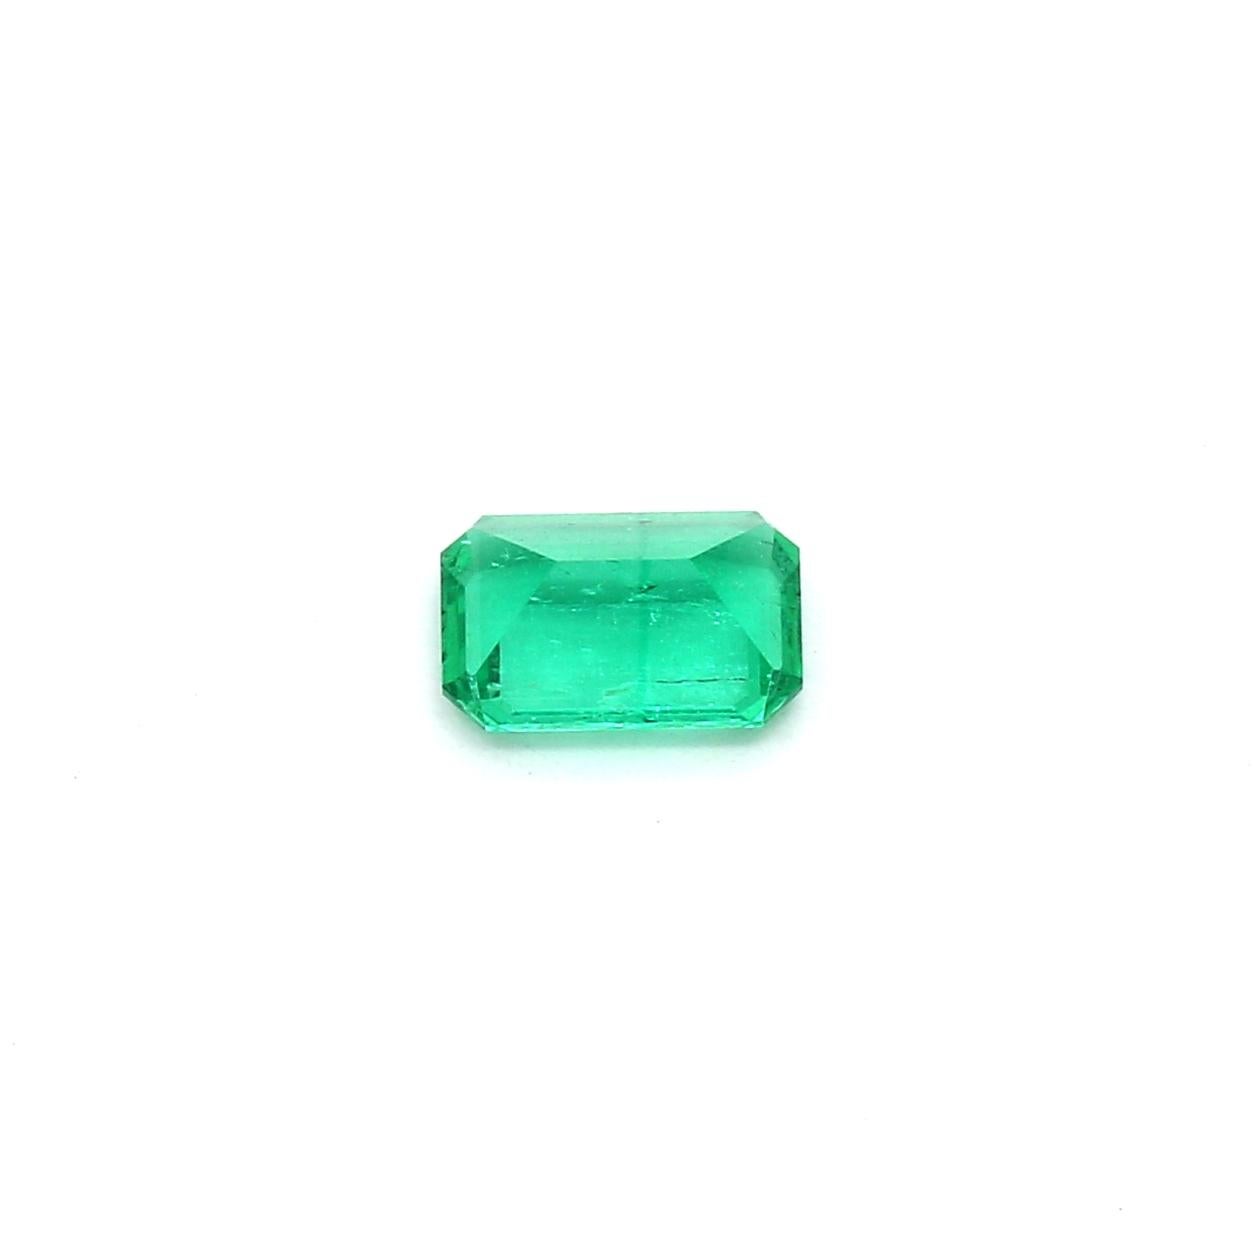 An amazing Russian Emerald which allows jewelers to create a unique piece of wearable art.
This exceptional quality gemstone would make a custom-made jewelry design. Perfect for a Ring or Pendant.

Shape - Octagon
Weight - 0.54 ct
Treatment -